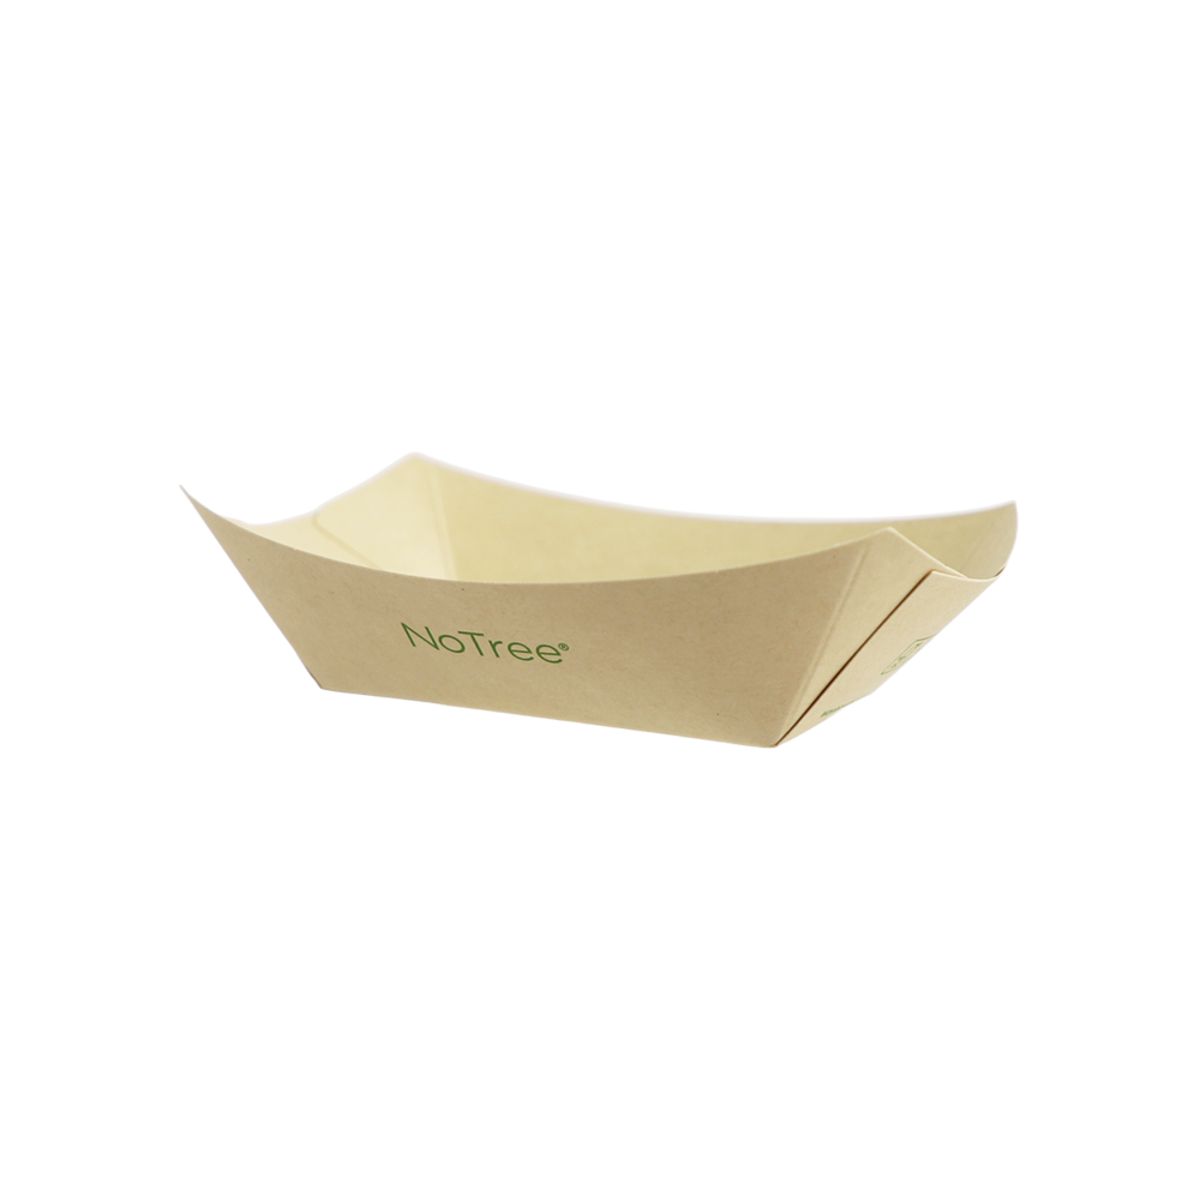 1/2 LB NoTree Boat Tray - Case of 1000 - World Centric